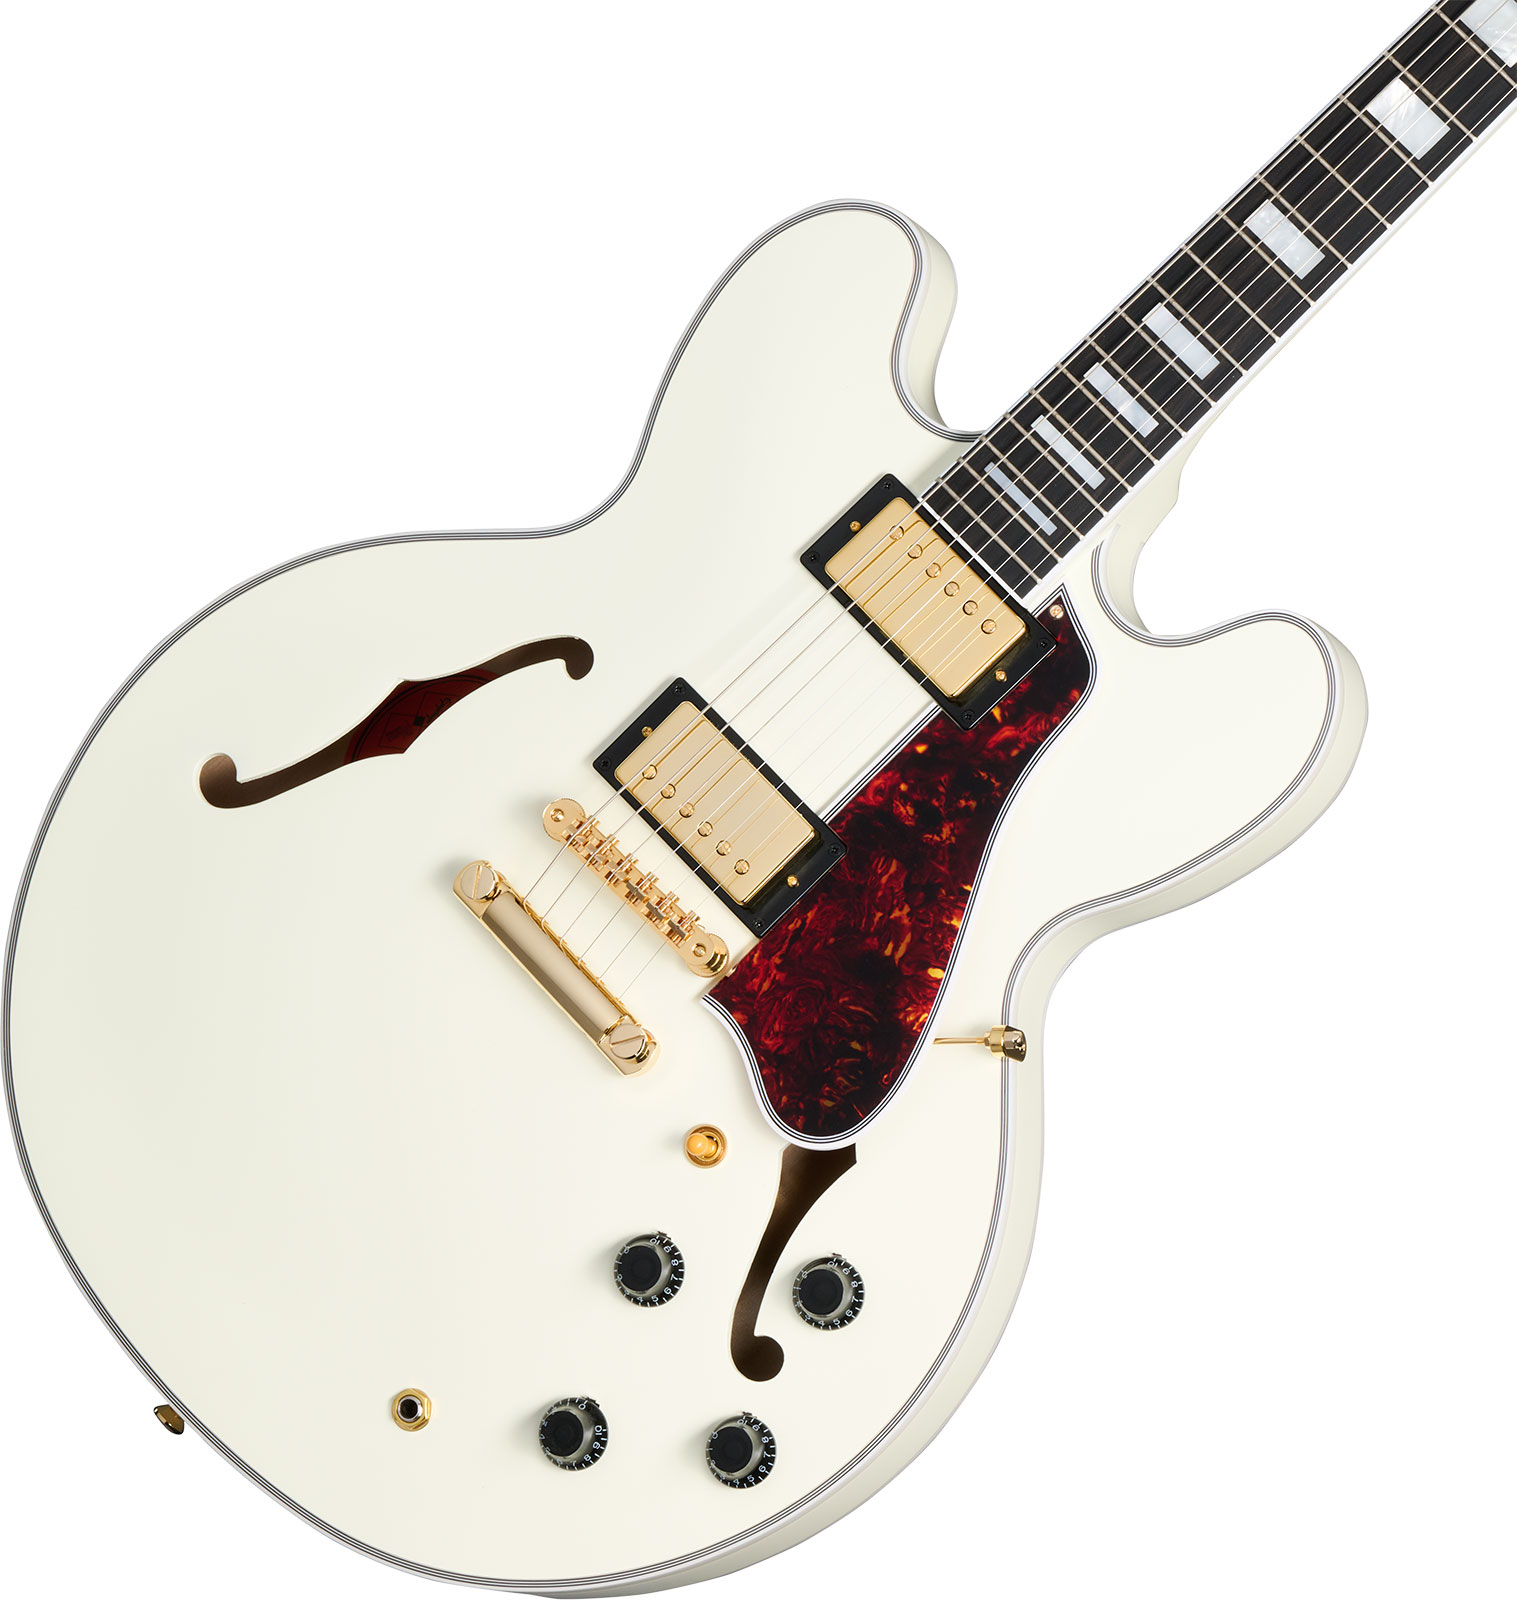 Epiphone Es355 1959 Inspired By 2h Gibson Ht Eb - Vos Classic White - Semi-hollow electric guitar - Variation 3